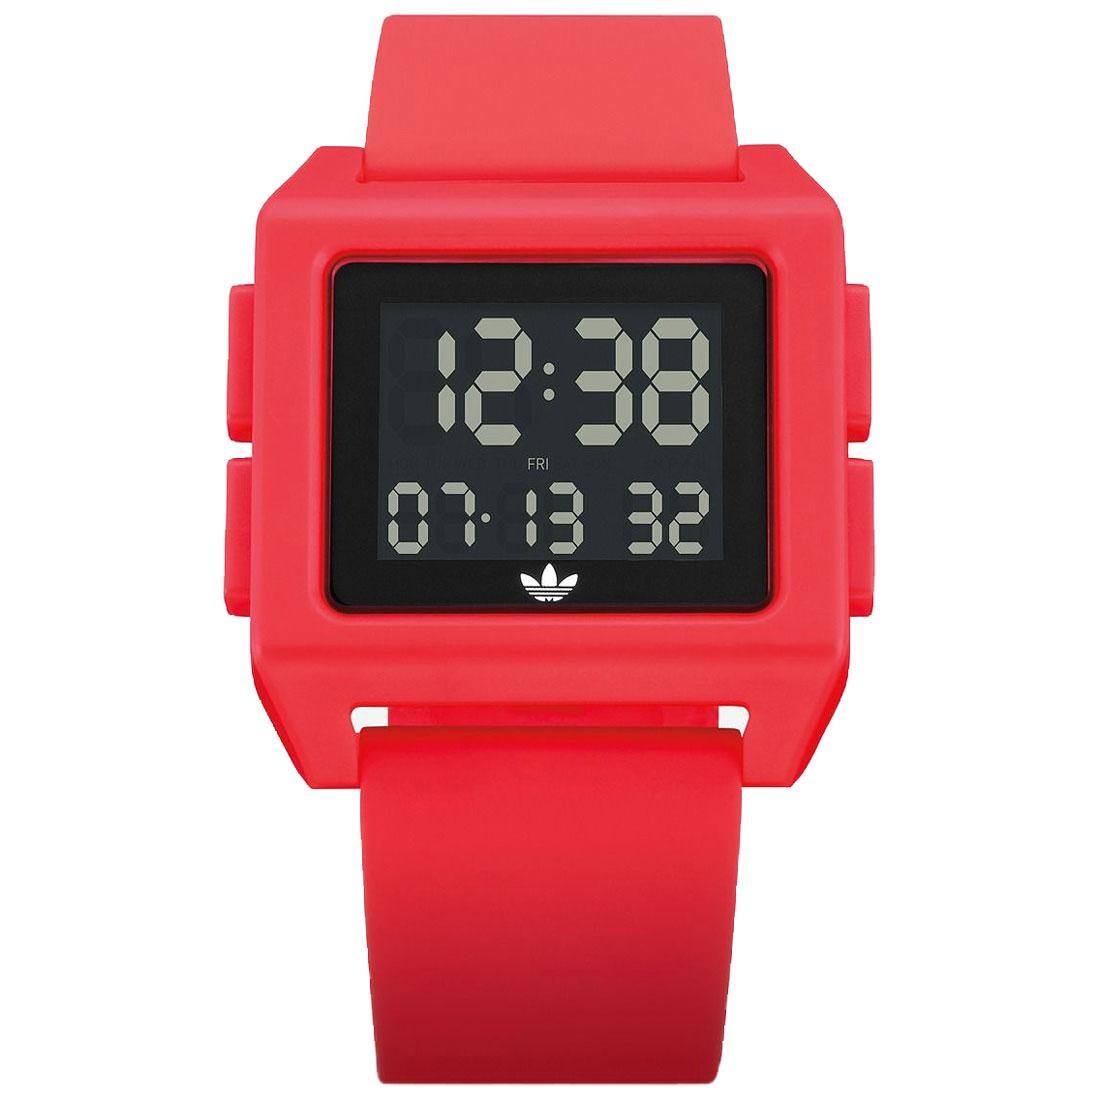 Adidas Archive SP1 Watch red shock red